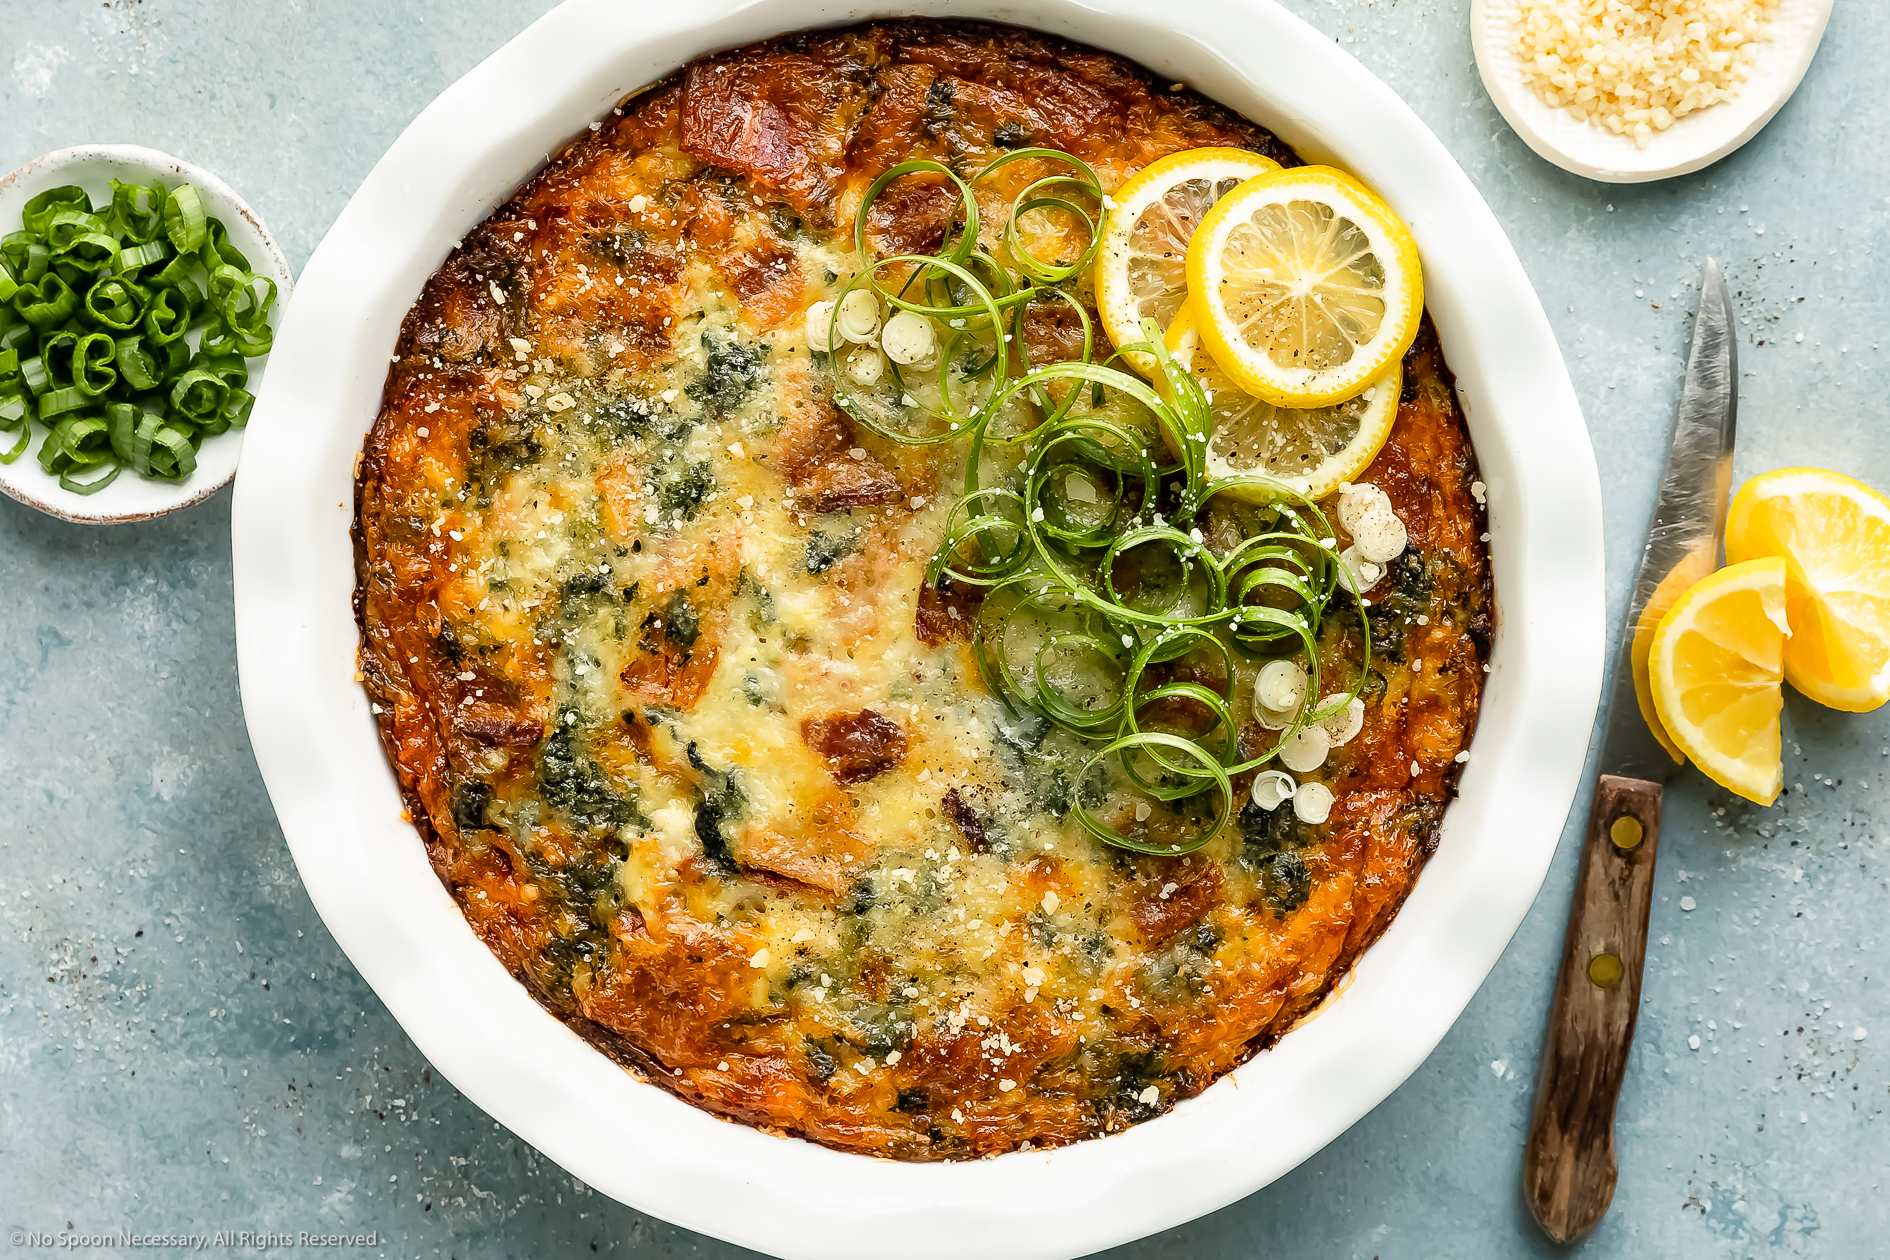 https://www.nospoonnecessary.com/wp-content/uploads/2020/03/Spinach-Bacon-Quiche-Step-by-Step-Photos-140.jpg